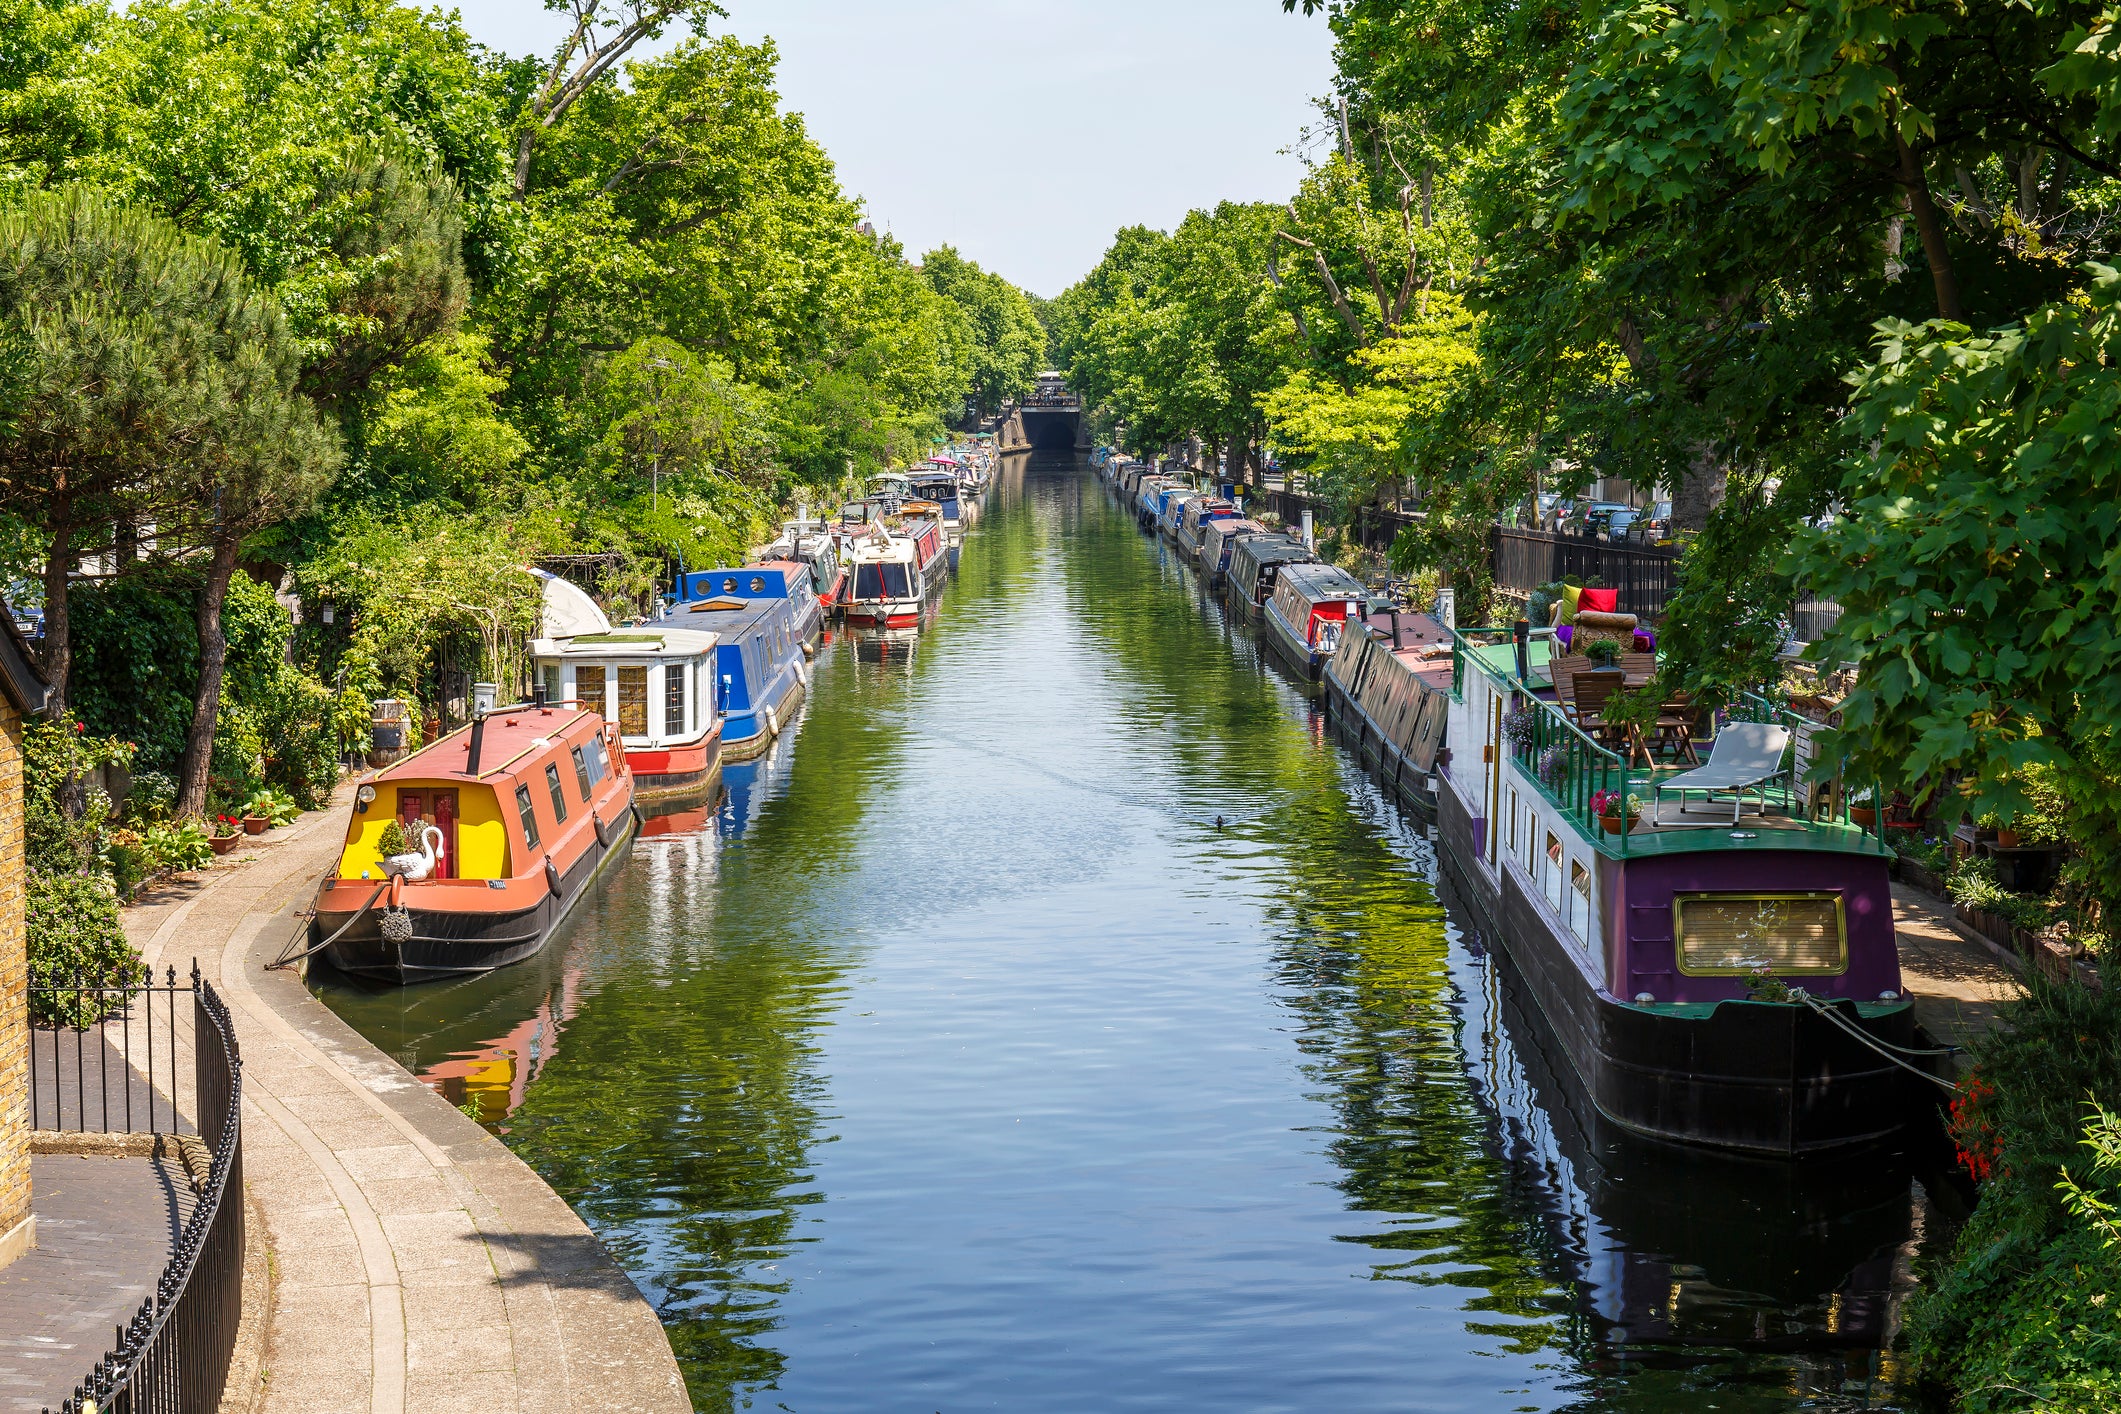 Narrow boats moored at Regent’s Canal in Little Venice, London